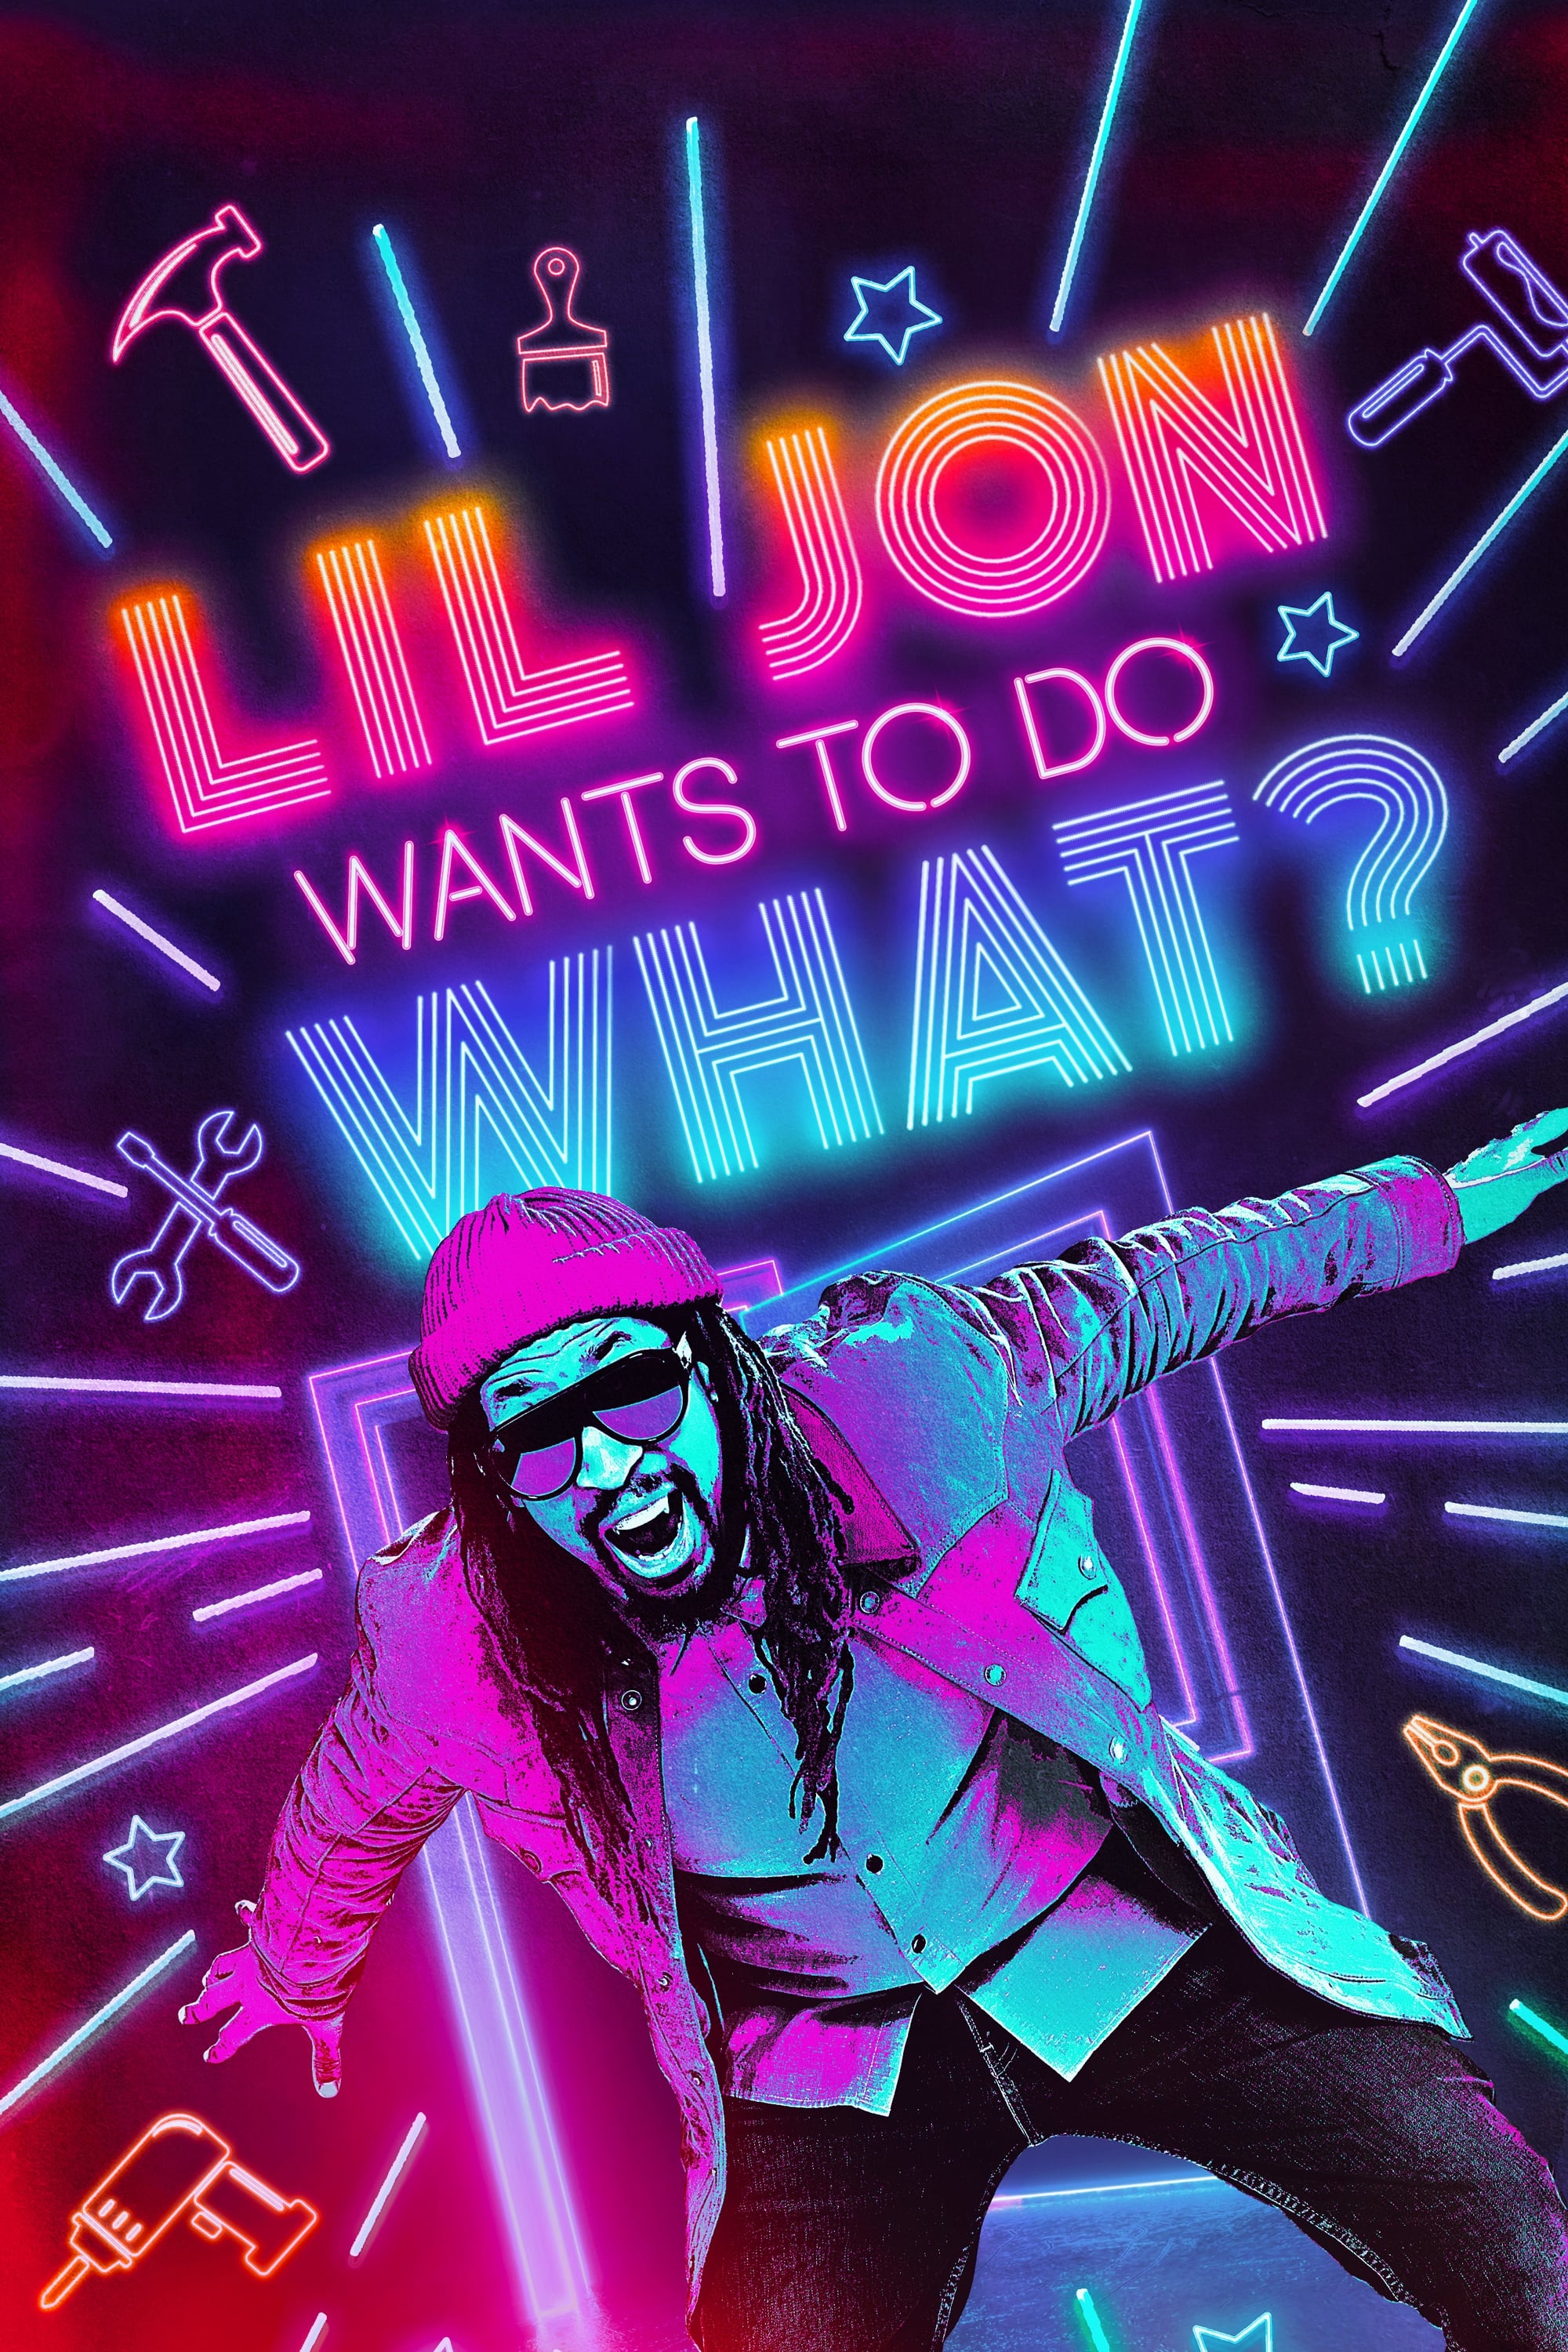 Lil Jon Wants to Do What? TV Shows About Home